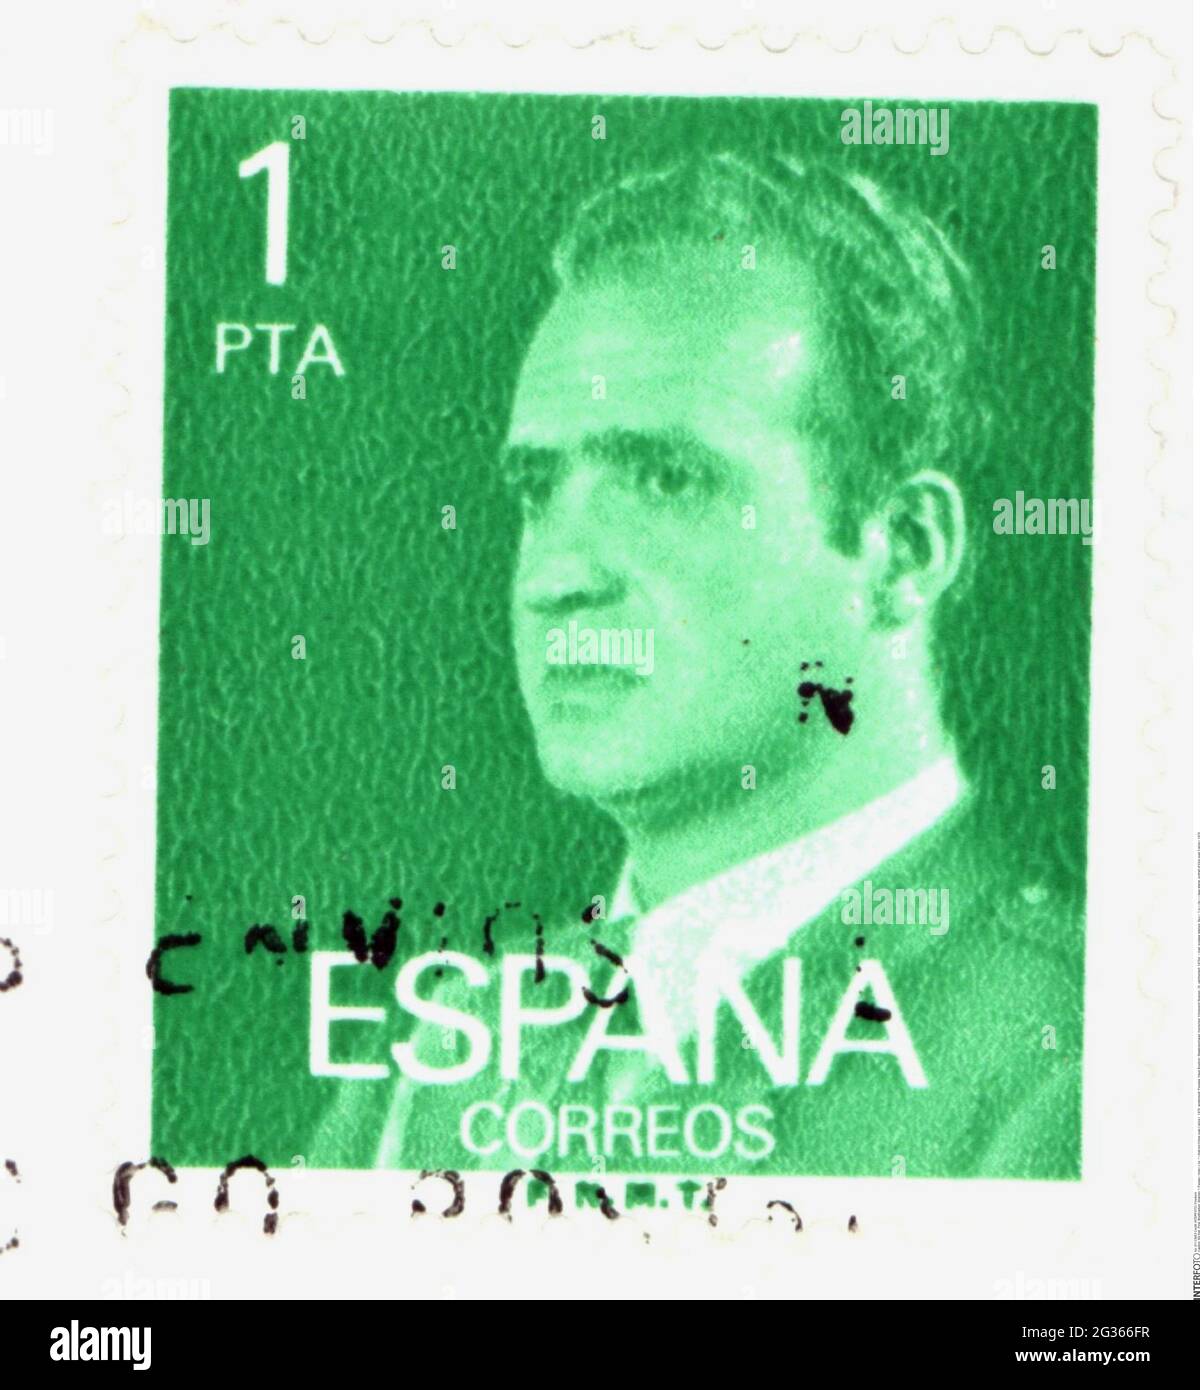 mail, postage stamps, Spain, 1 peseta postage stamp, portrait of King Juan Carlos I, 1976, ADDITIONAL-RIGHTS-CLEARANCE-INFO-NOT-AVAILABLE Stock Photo